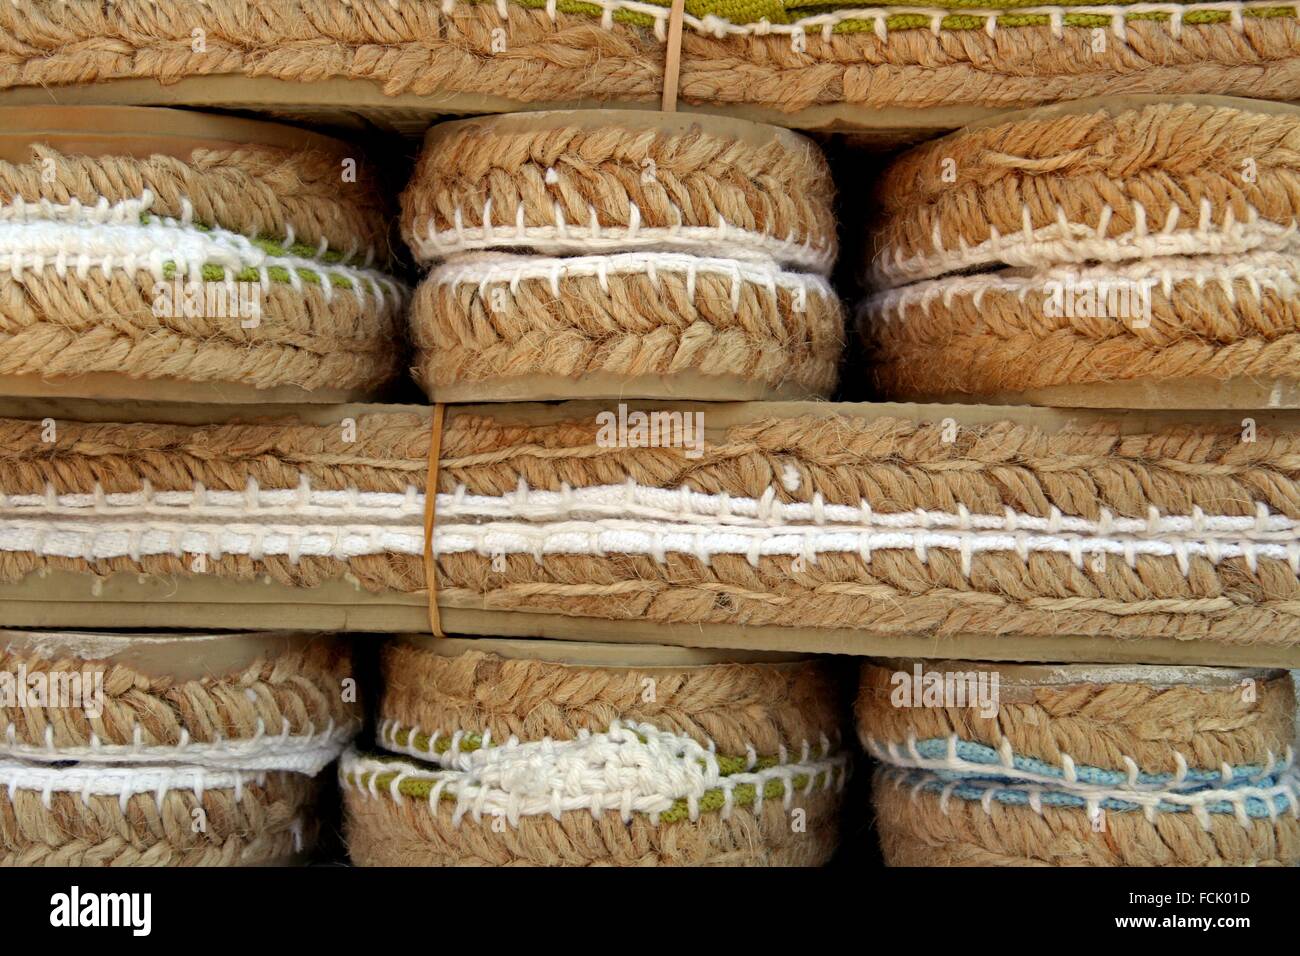 Page 2 - Espadrilles Spain High Resolution Stock Photography and Images -  Alamy